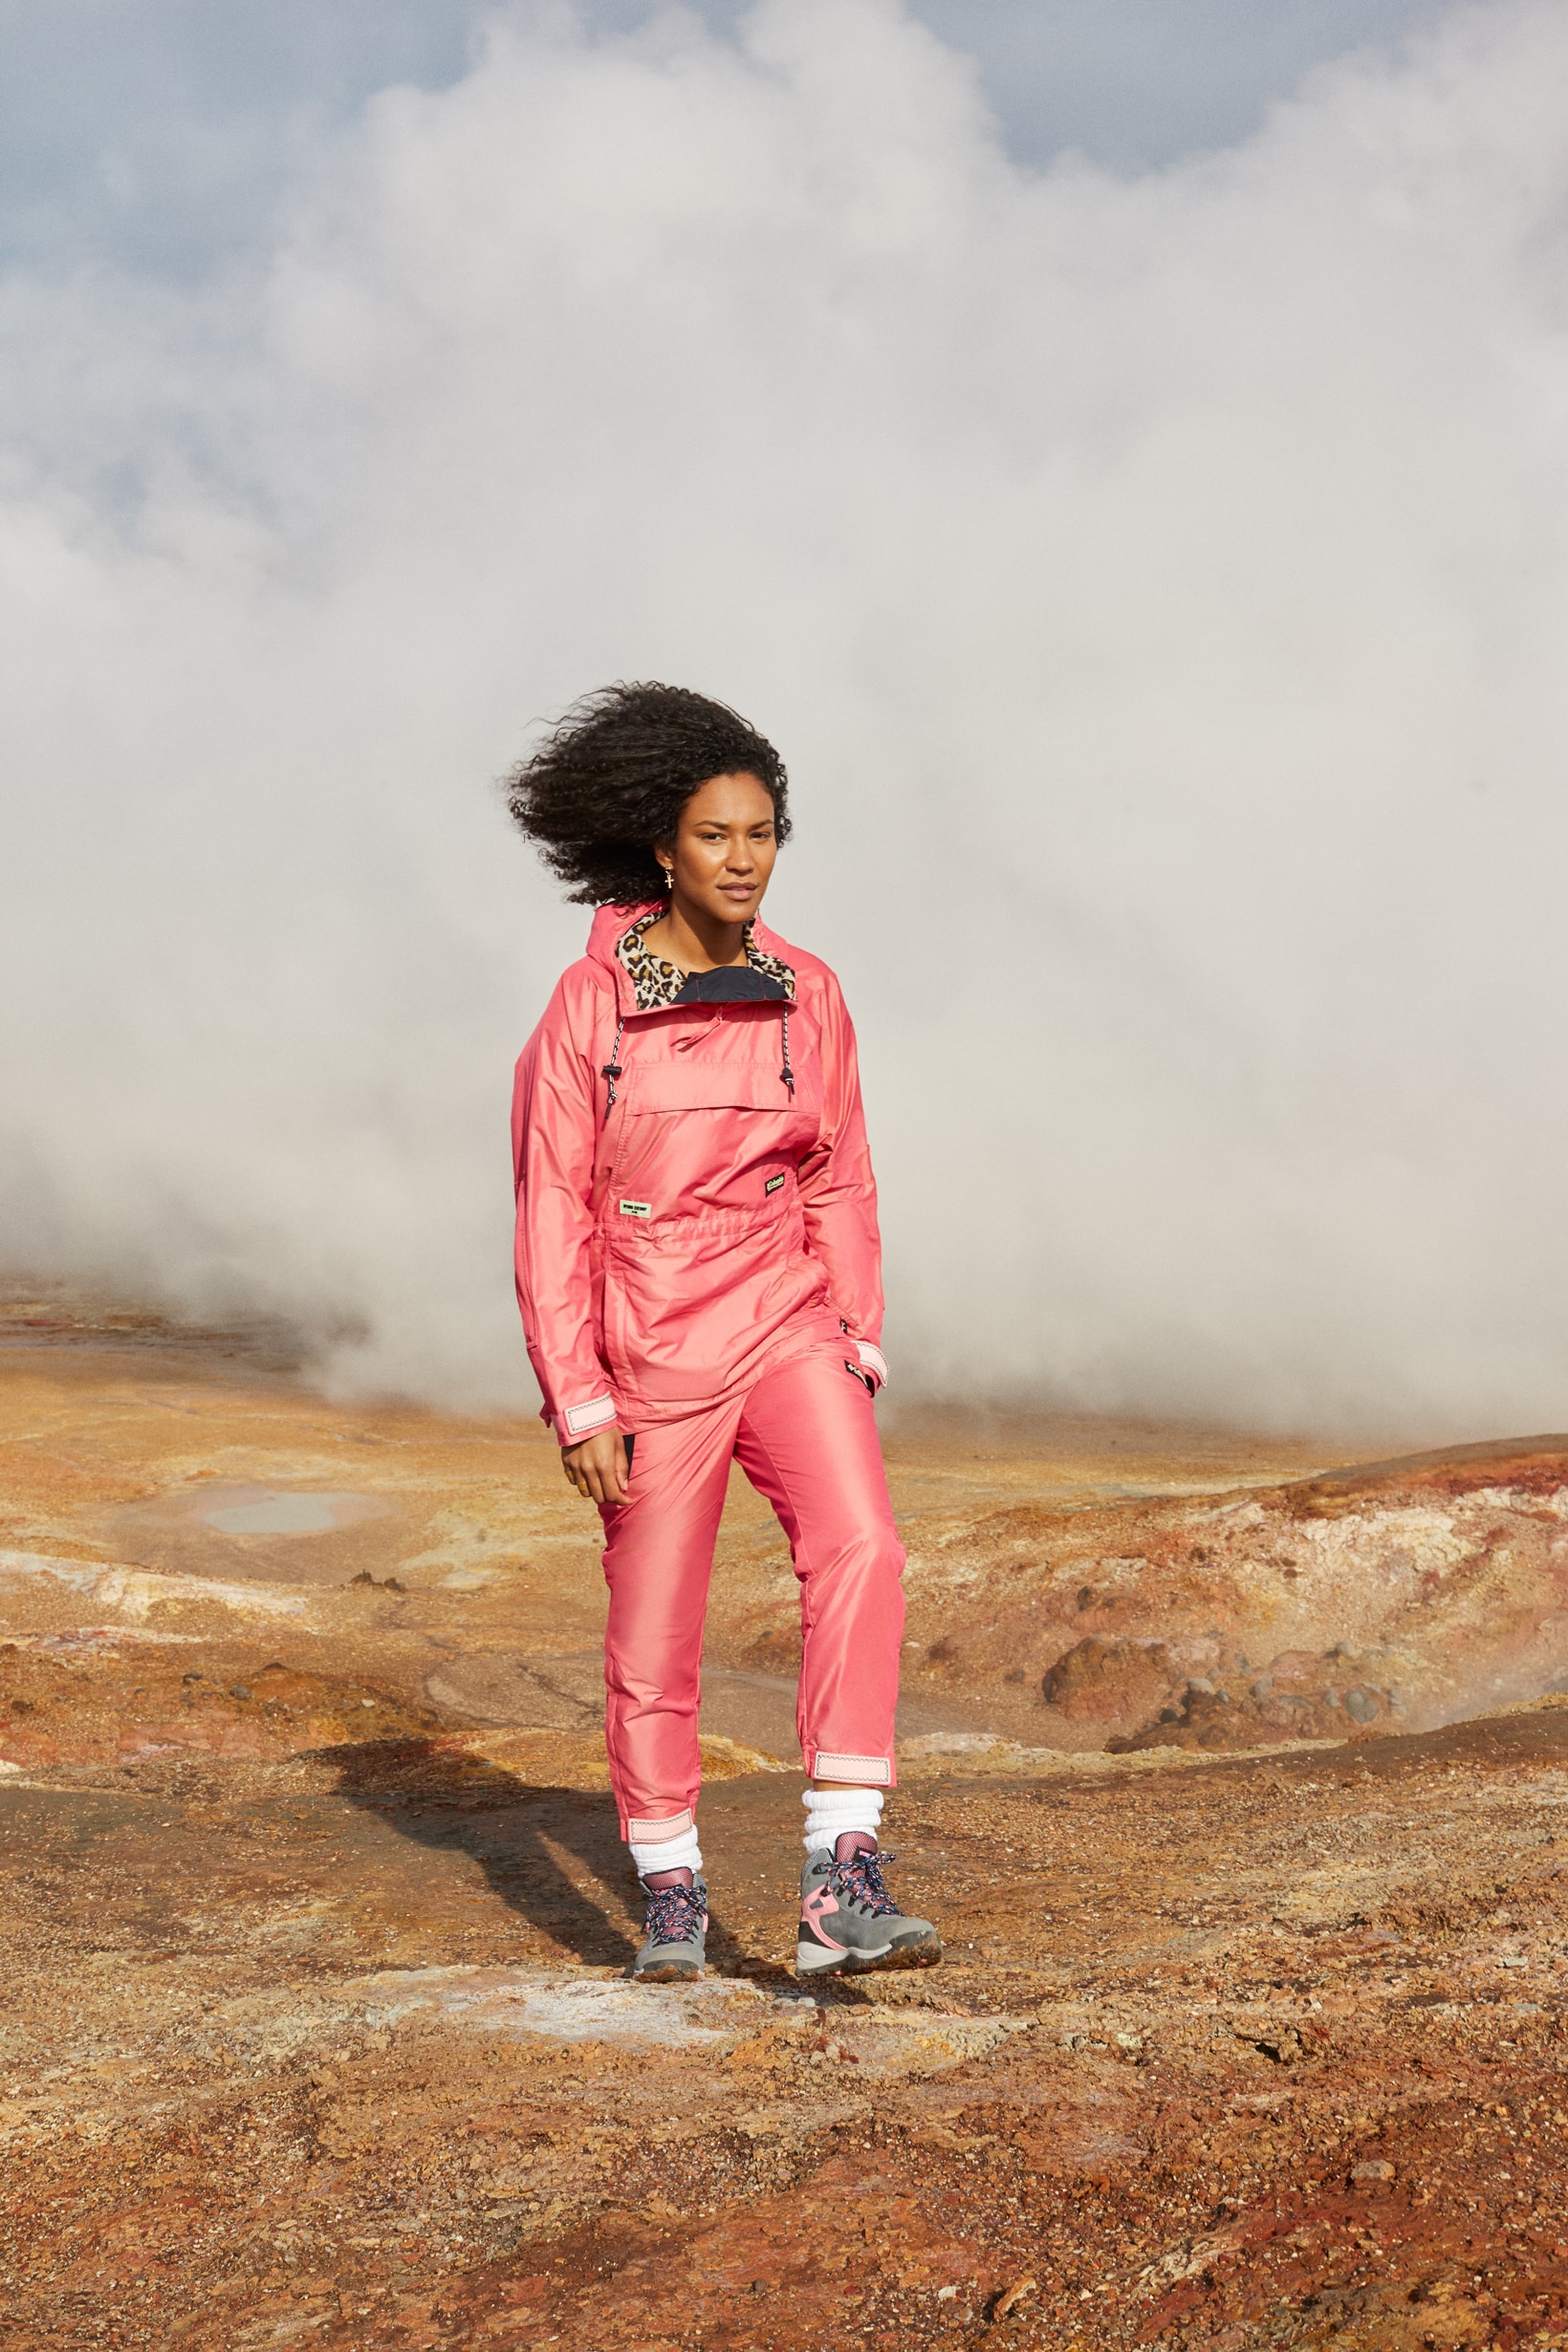 Opening Ceremony x Columbia Spring 2019 Capsule Collection Jacket Sweatpants Pink Hiking Boots Grey